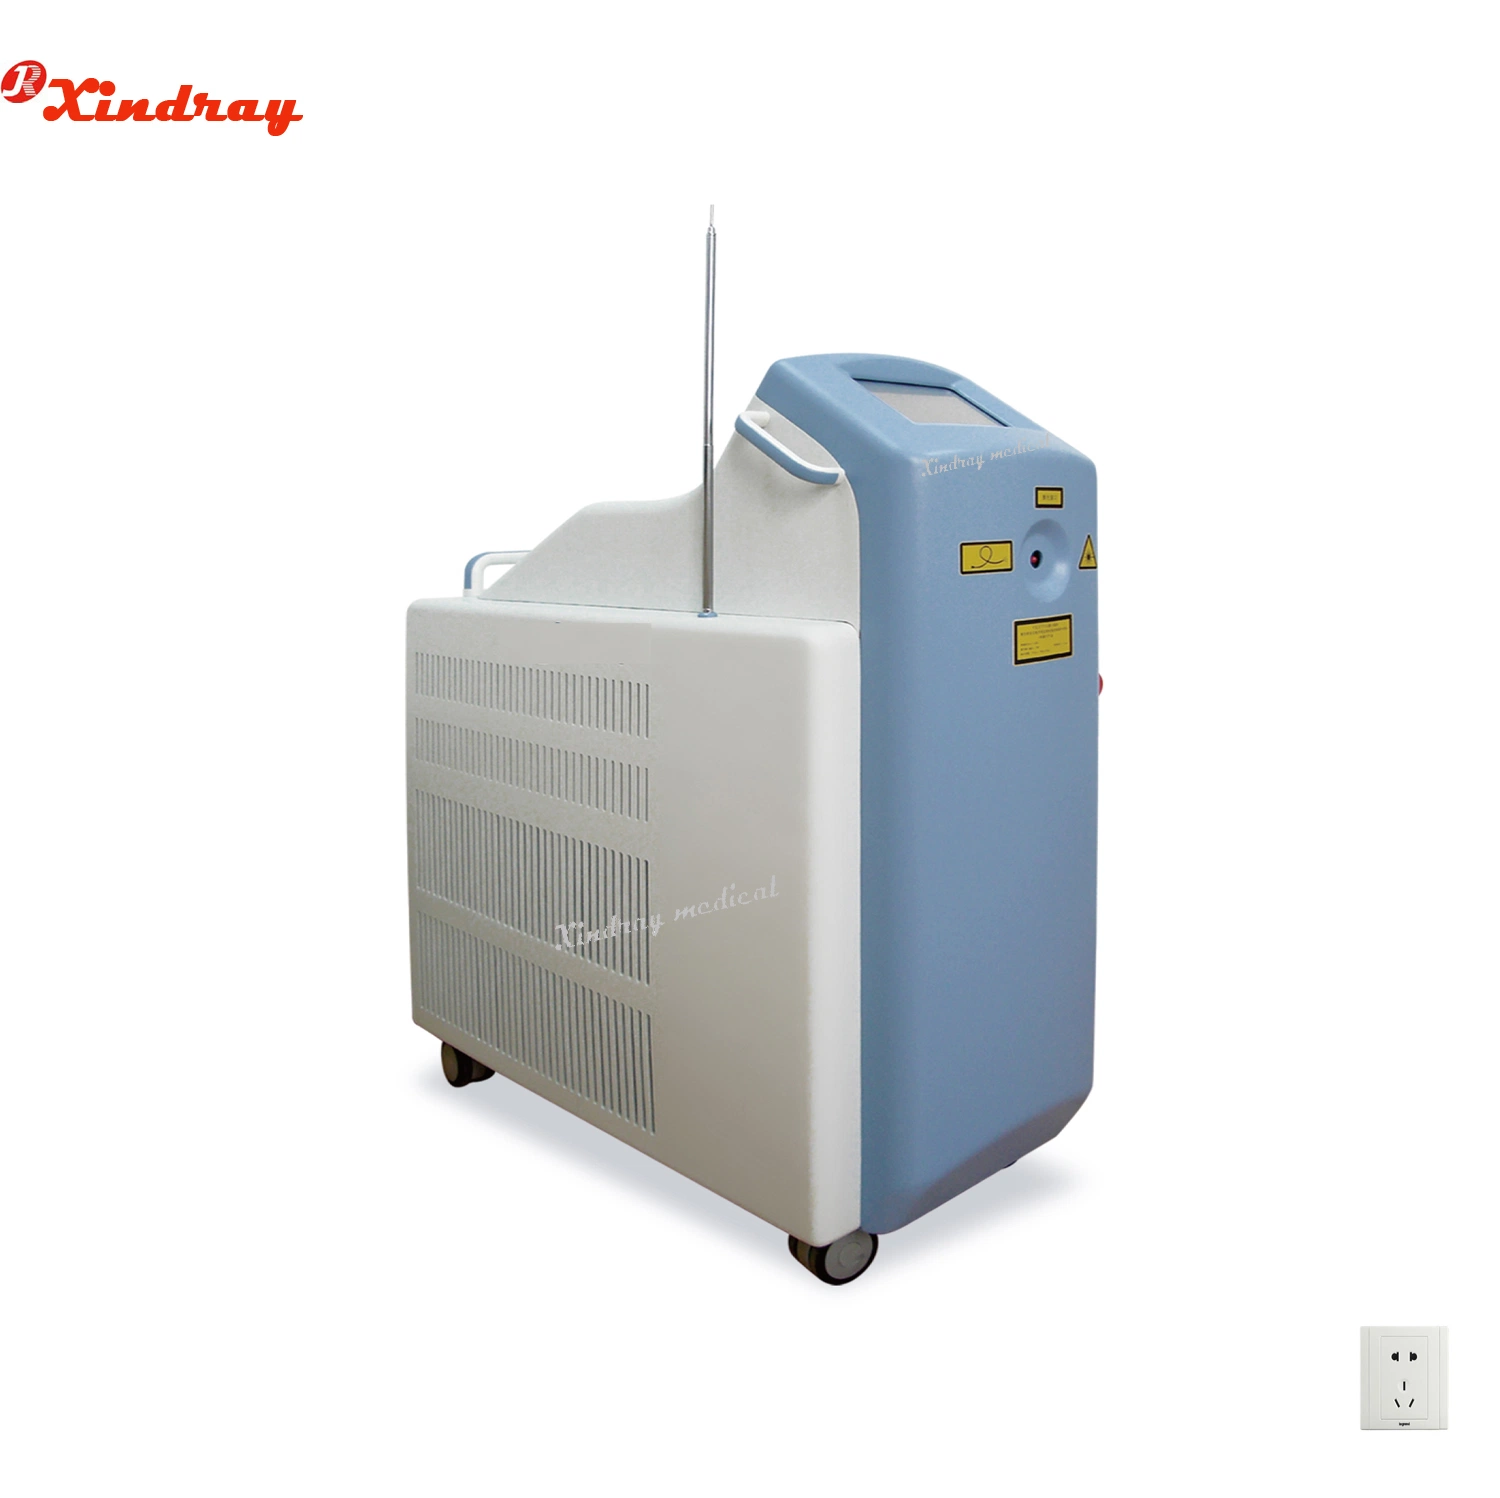 Medical Surgical Equipment Urology Holmium Laser for Surgical Treatments